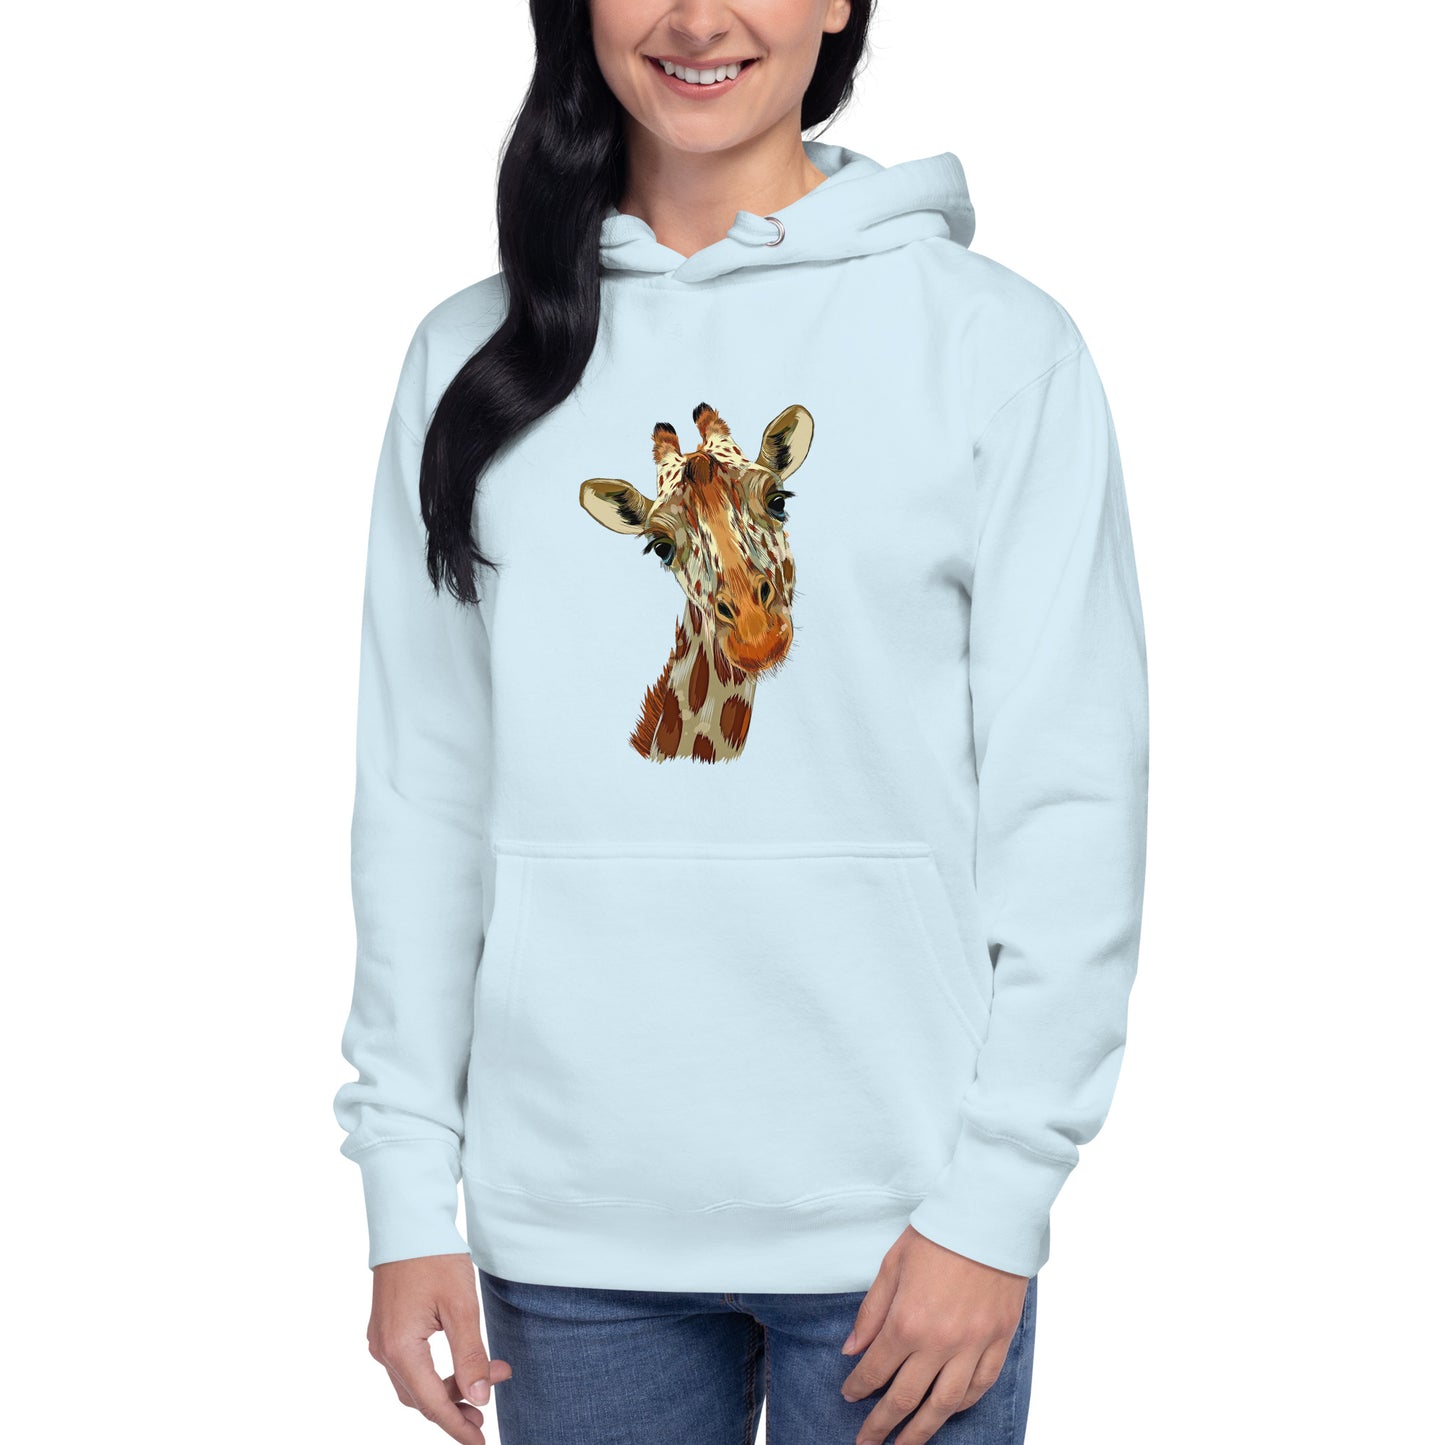 Women and Men's (Unisex) Hoodie printed with a Giraffe